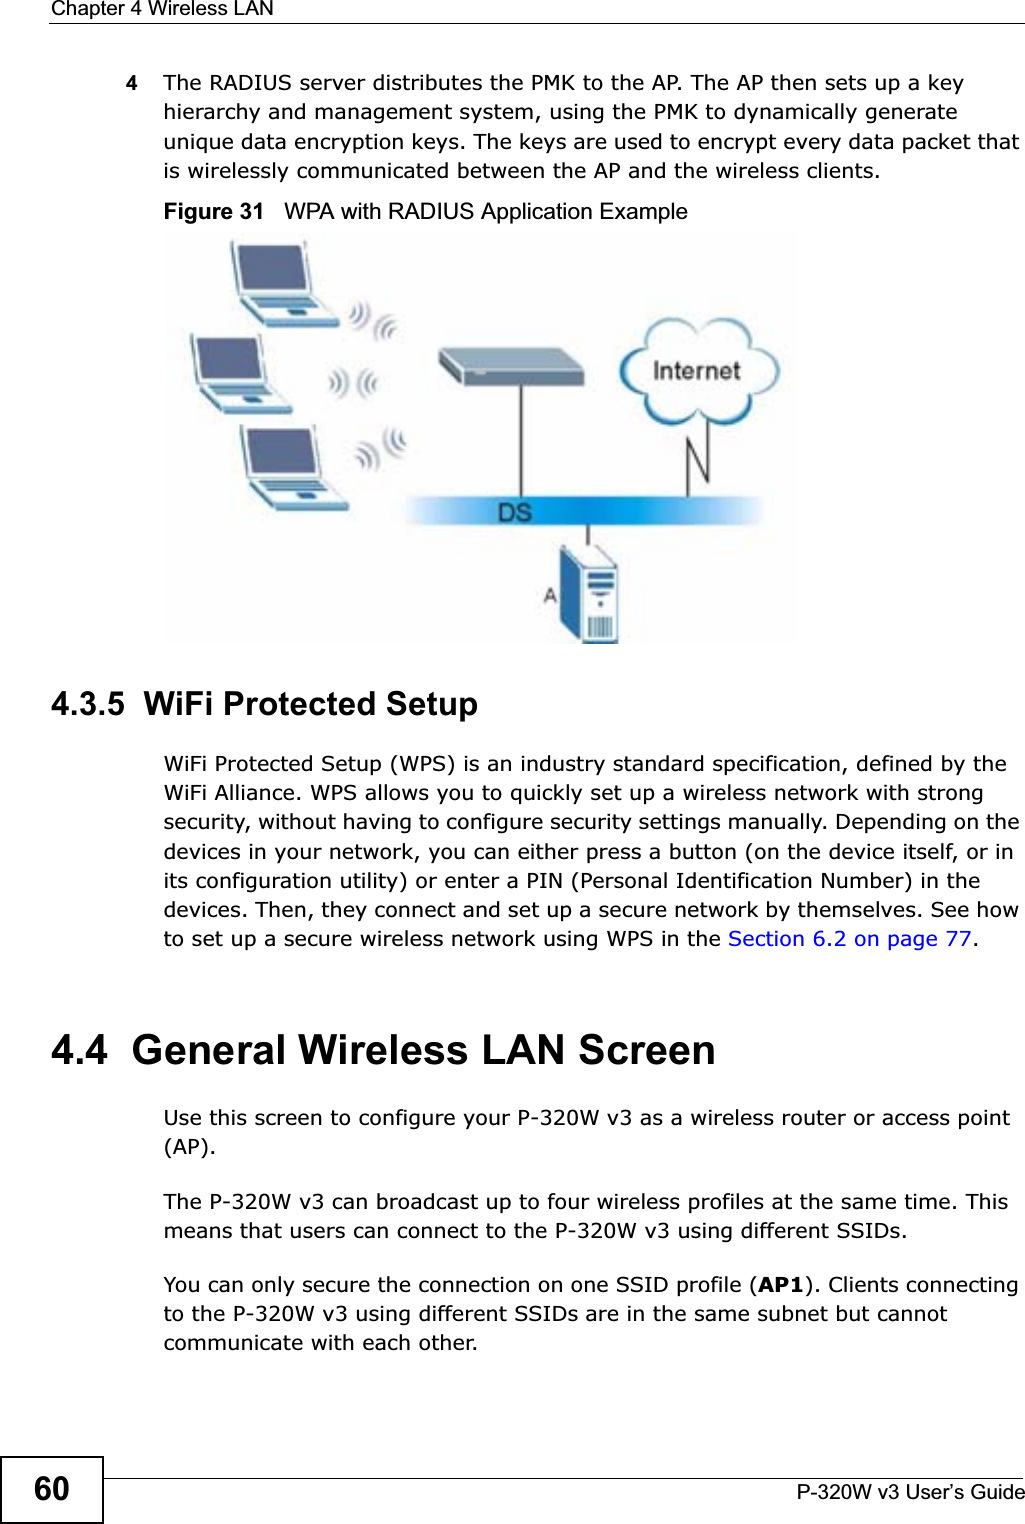 Chapter 4 Wireless LANP-320W v3 User’s Guide604The RADIUS server distributes the PMK to the AP. The AP then sets up a key hierarchy and management system, using the PMK to dynamically generate unique data encryption keys. The keys are used to encrypt every data packet that is wirelessly communicated between the AP and the wireless clients.Figure 31   WPA with RADIUS Application Example4.3.5  WiFi Protected SetupWiFi Protected Setup (WPS) is an industry standard specification, defined by the WiFi Alliance. WPS allows you to quickly set up a wireless network with strong security, without having to configure security settings manually. Depending on the devices in your network, you can either press a button (on the device itself, or in its configuration utility) or enter a PIN (Personal Identification Number) in the devices. Then, they connect and set up a secure network by themselves. See how to set up a secure wireless network using WPS in the Section 6.2 on page 77.4.4  General Wireless LAN Screen Use this screen to configure your P-320W v3 as a wireless router or access point (AP).The P-320W v3 can broadcast up to four wireless profiles at the same time. This means that users can connect to the P-320W v3 using different SSIDs.You can only secure the connection on one SSID profile (AP1). Clients connecting to the P-320W v3 using different SSIDs are in the same subnet but cannot communicate with each other.  